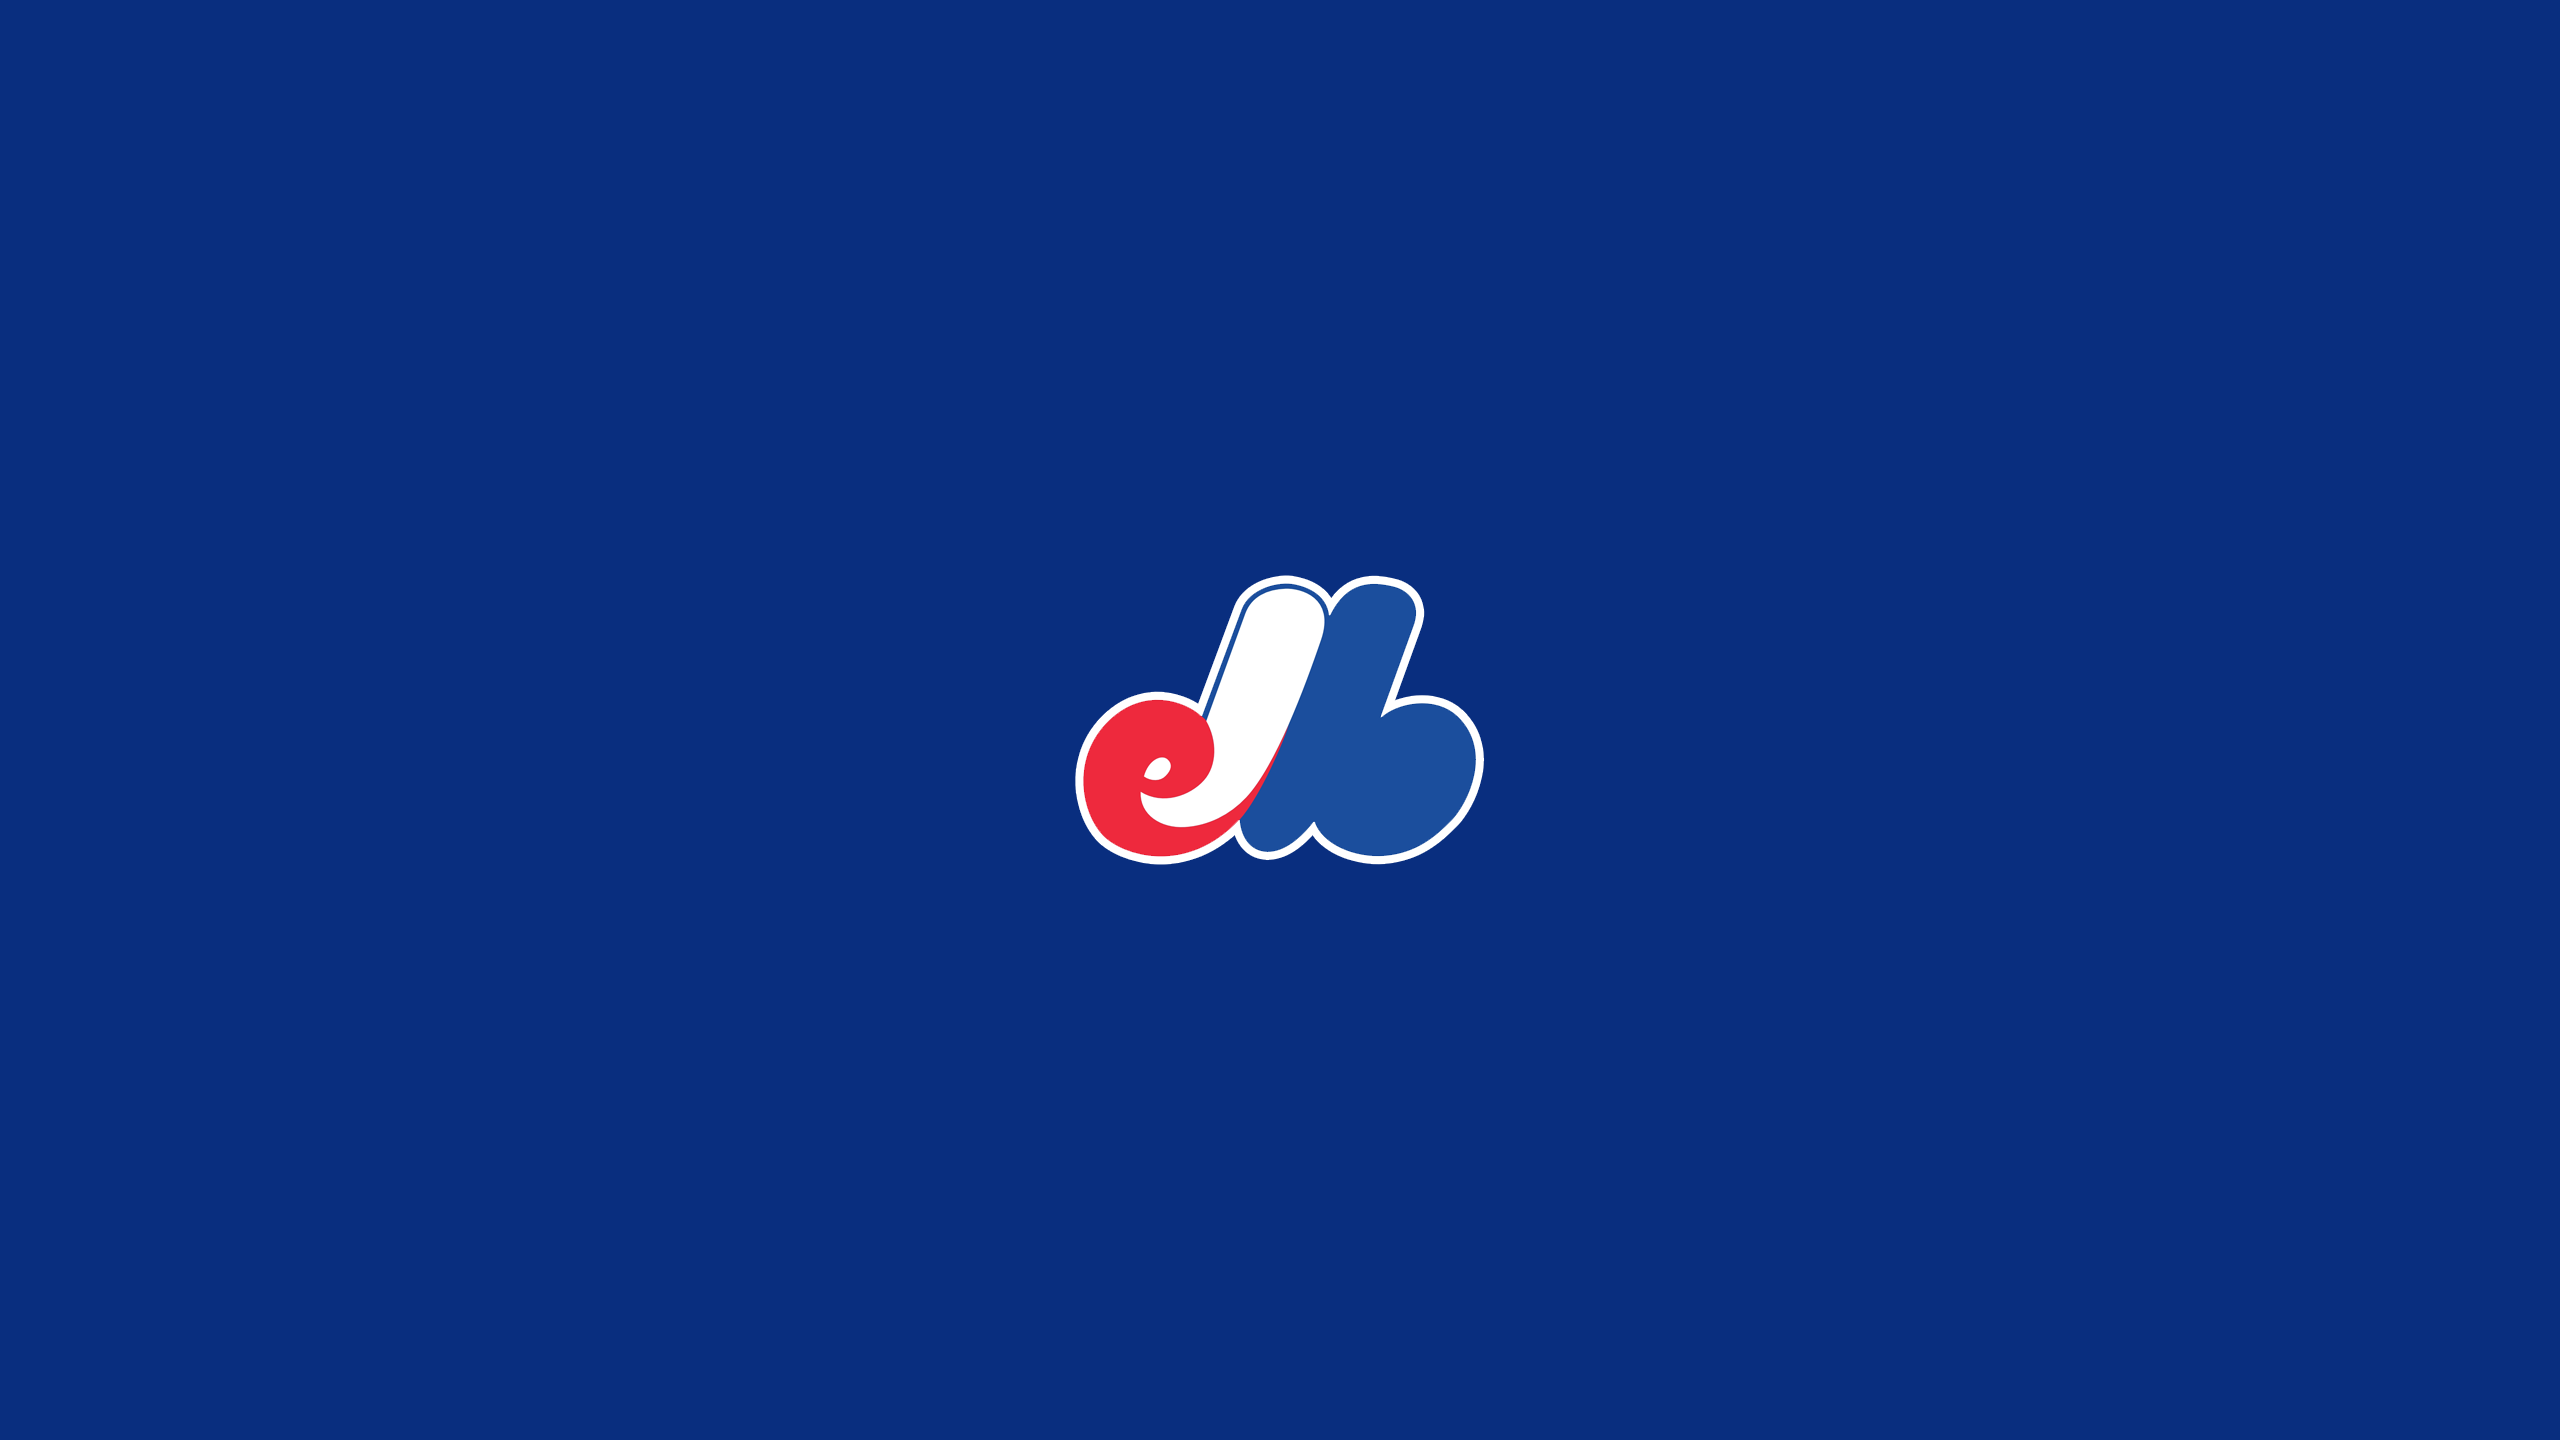 Free download brewers montral expos montral expos montral expos montreal expos [2560x1440] for your Desktop, Mobile & Tablet. Explore Montreal Expos Wallpaper. Wallpaper Outlets Maine, Wallpaper Discount Outlets in